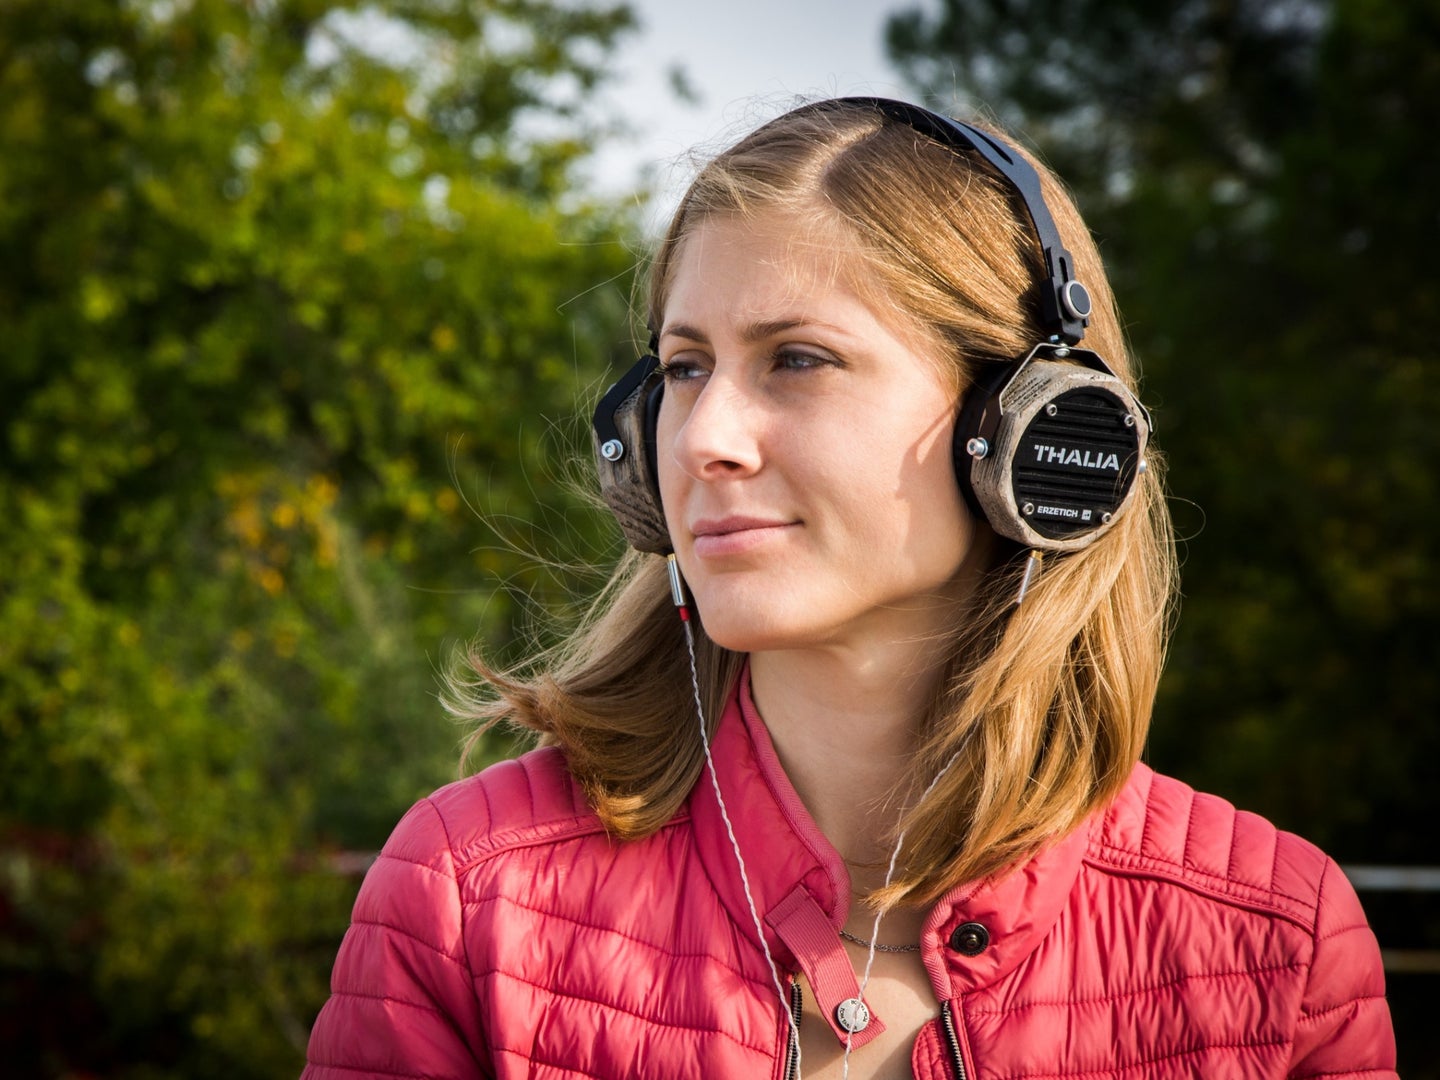 A woman in a pink jacket outside near some trees, listening to music on a pair of Thalia headphones.